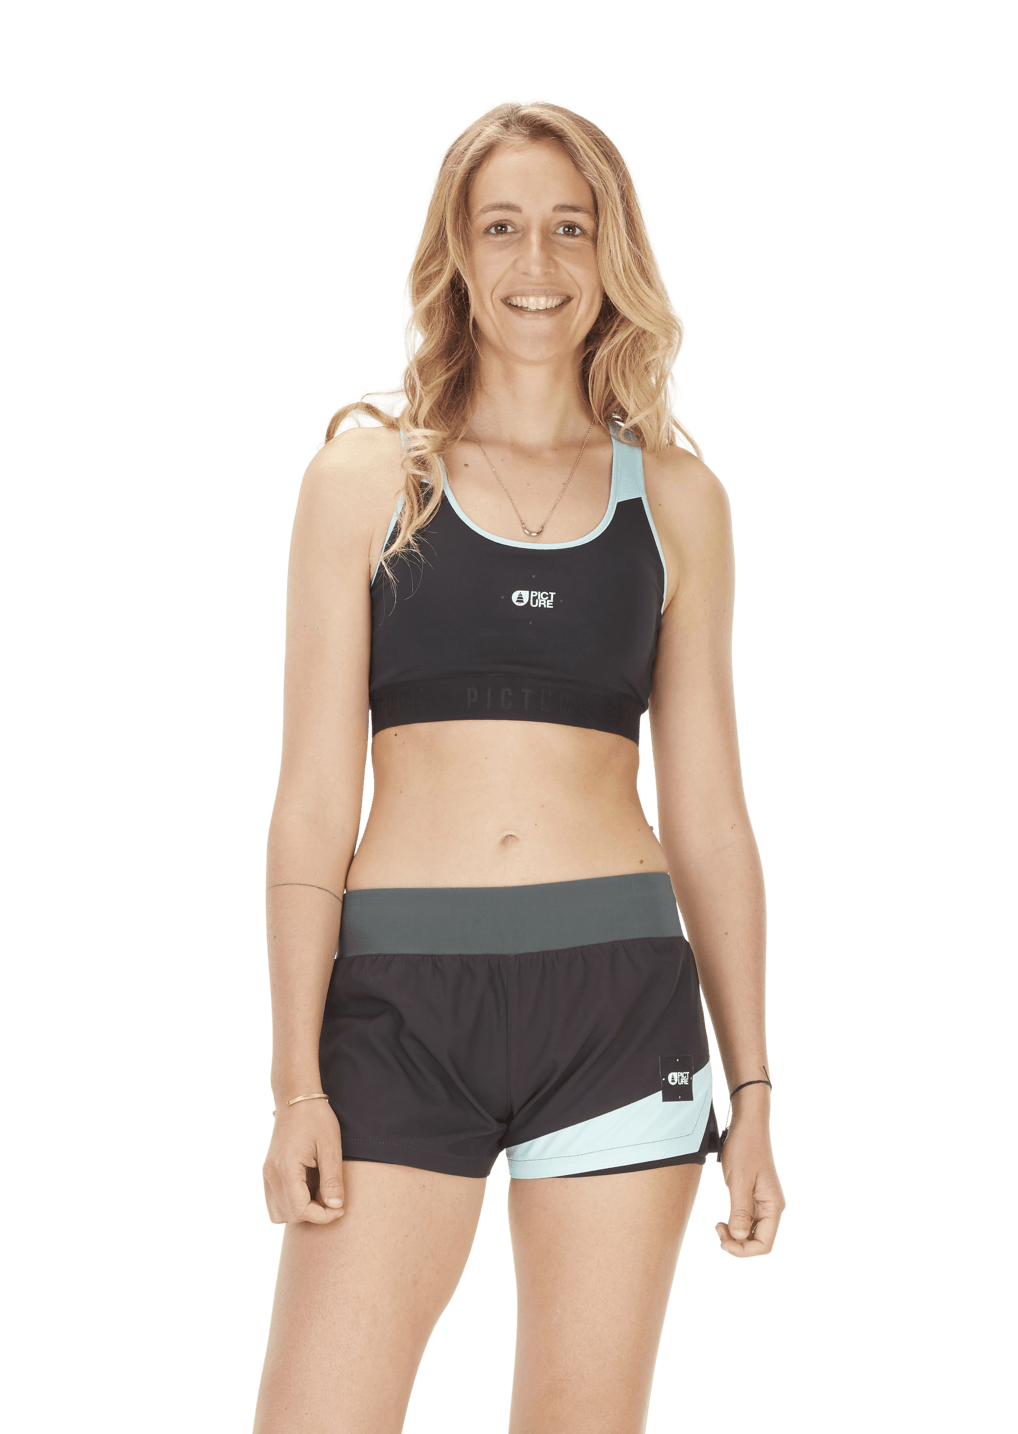 Picture Organic Women's Ivory Sports Bra - Recycled Polyester, Black / M